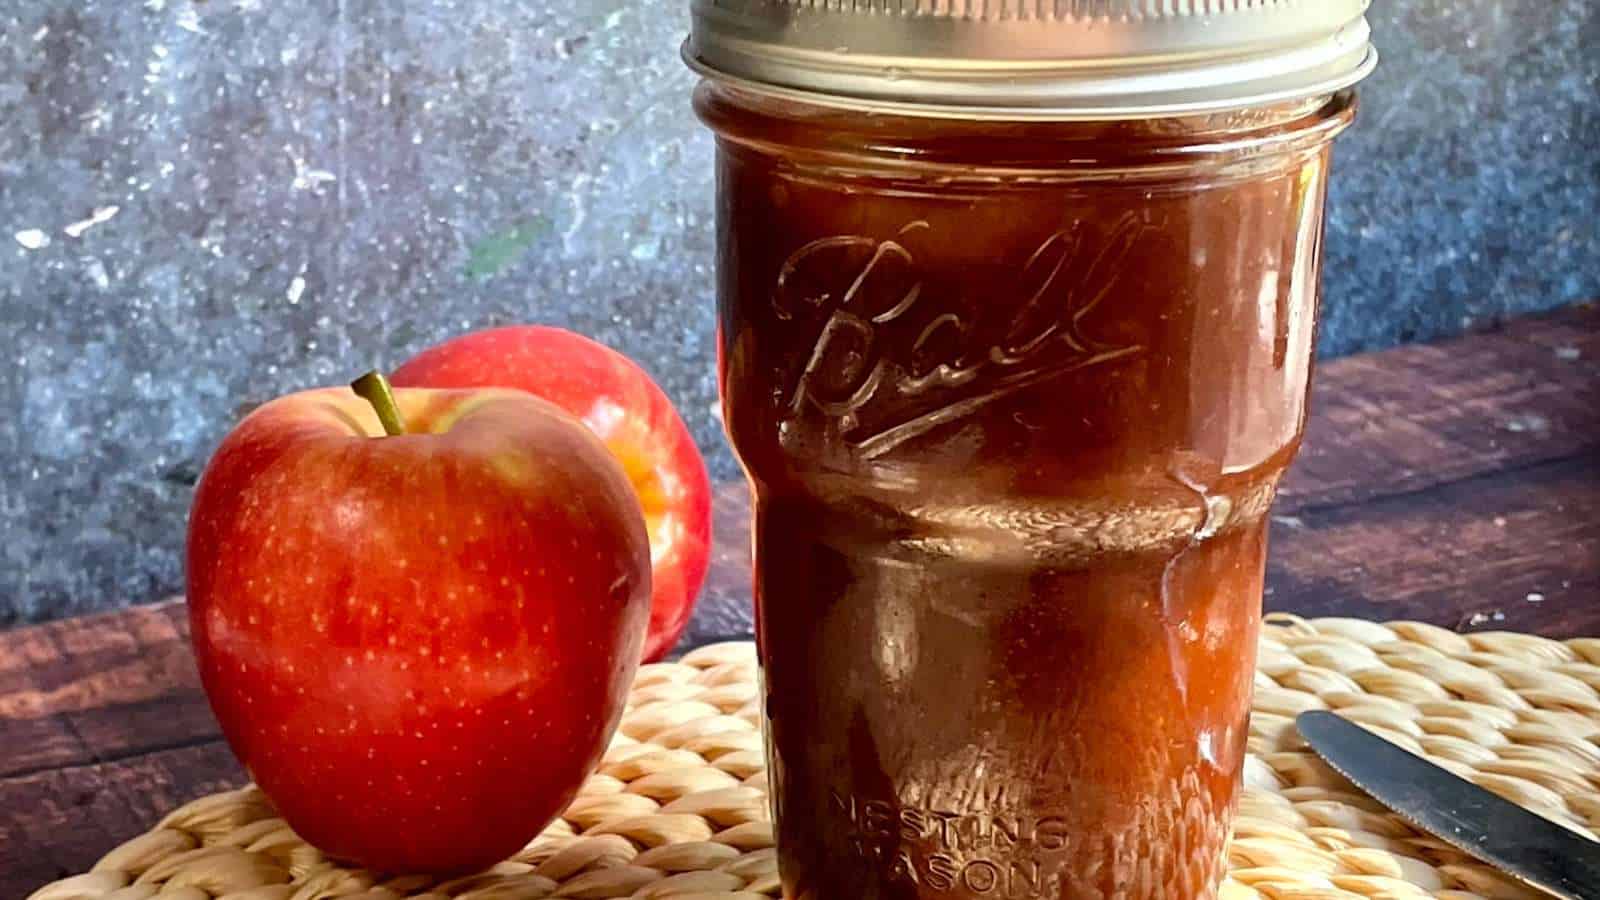 A mason jar of apple butterwith apples and a knife next to it.